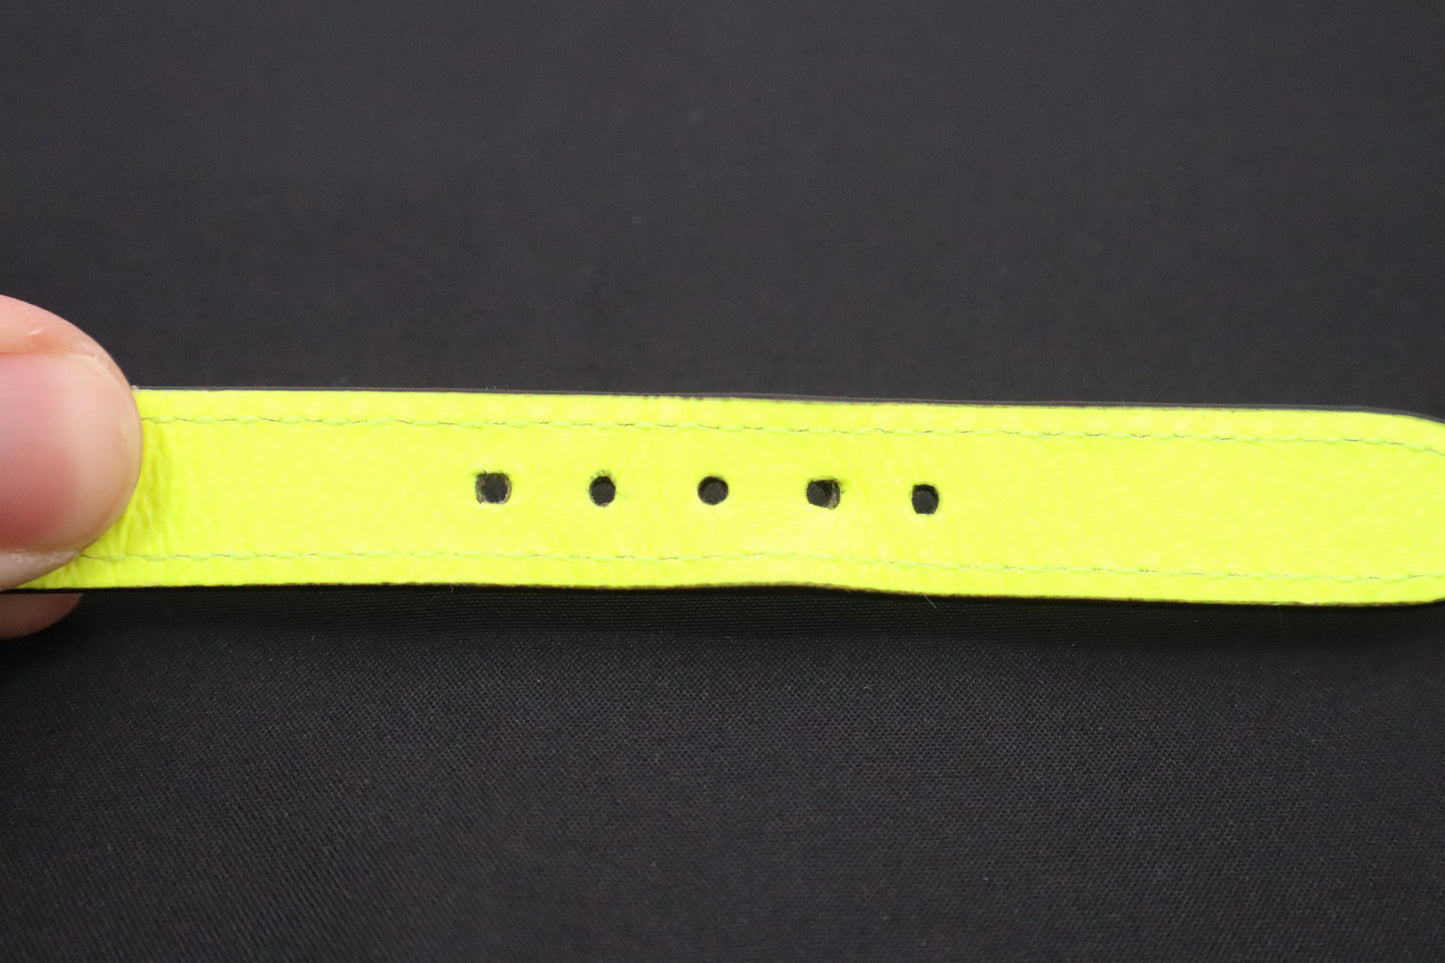 Gucci Dog Collar in Neon Yellow Leather